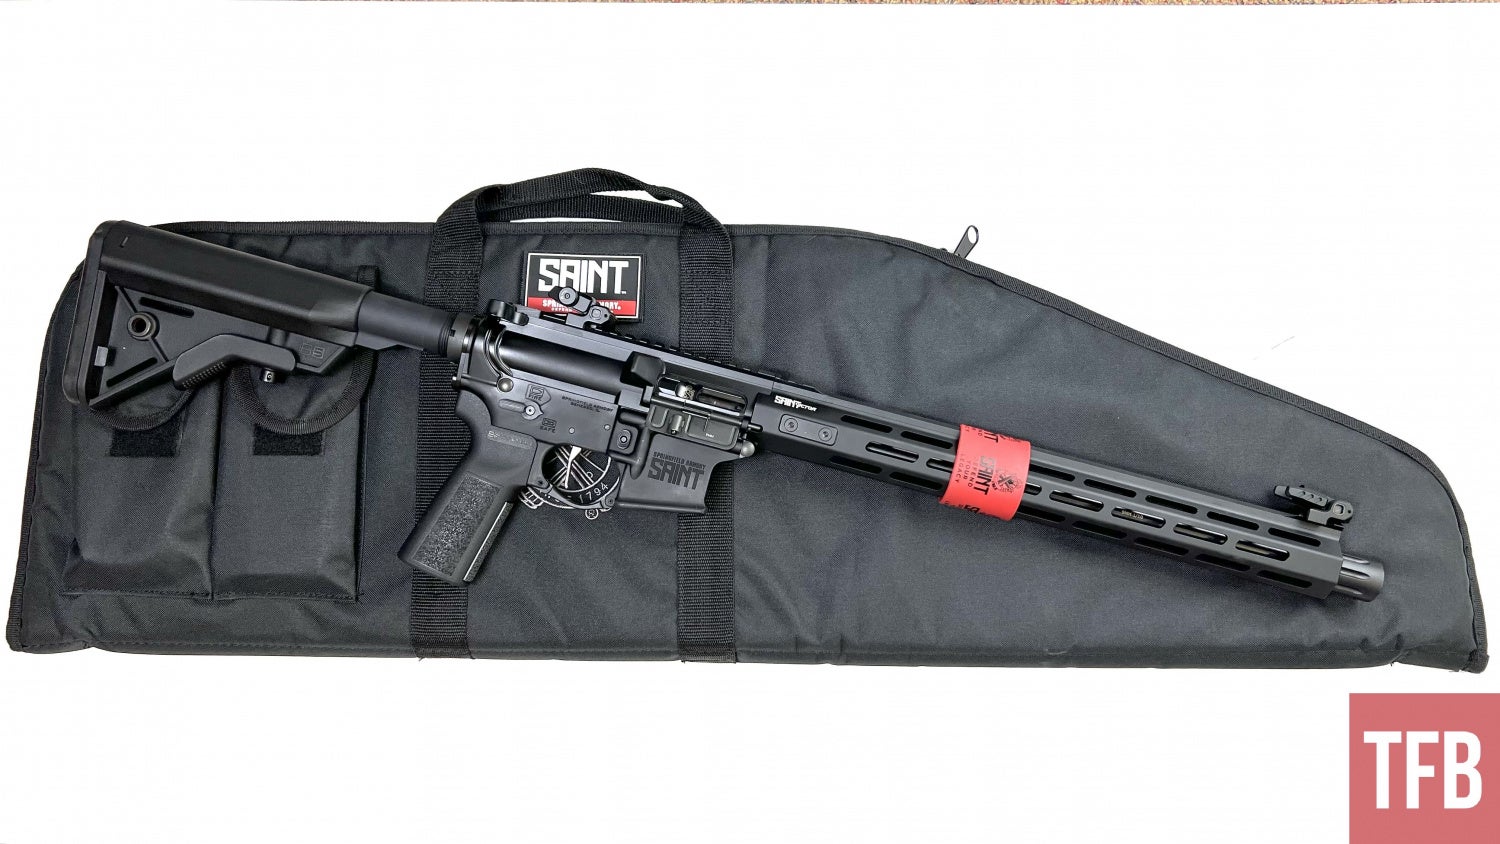 TFB Review: Springfield Armory Saint Victor 9mm Carbine